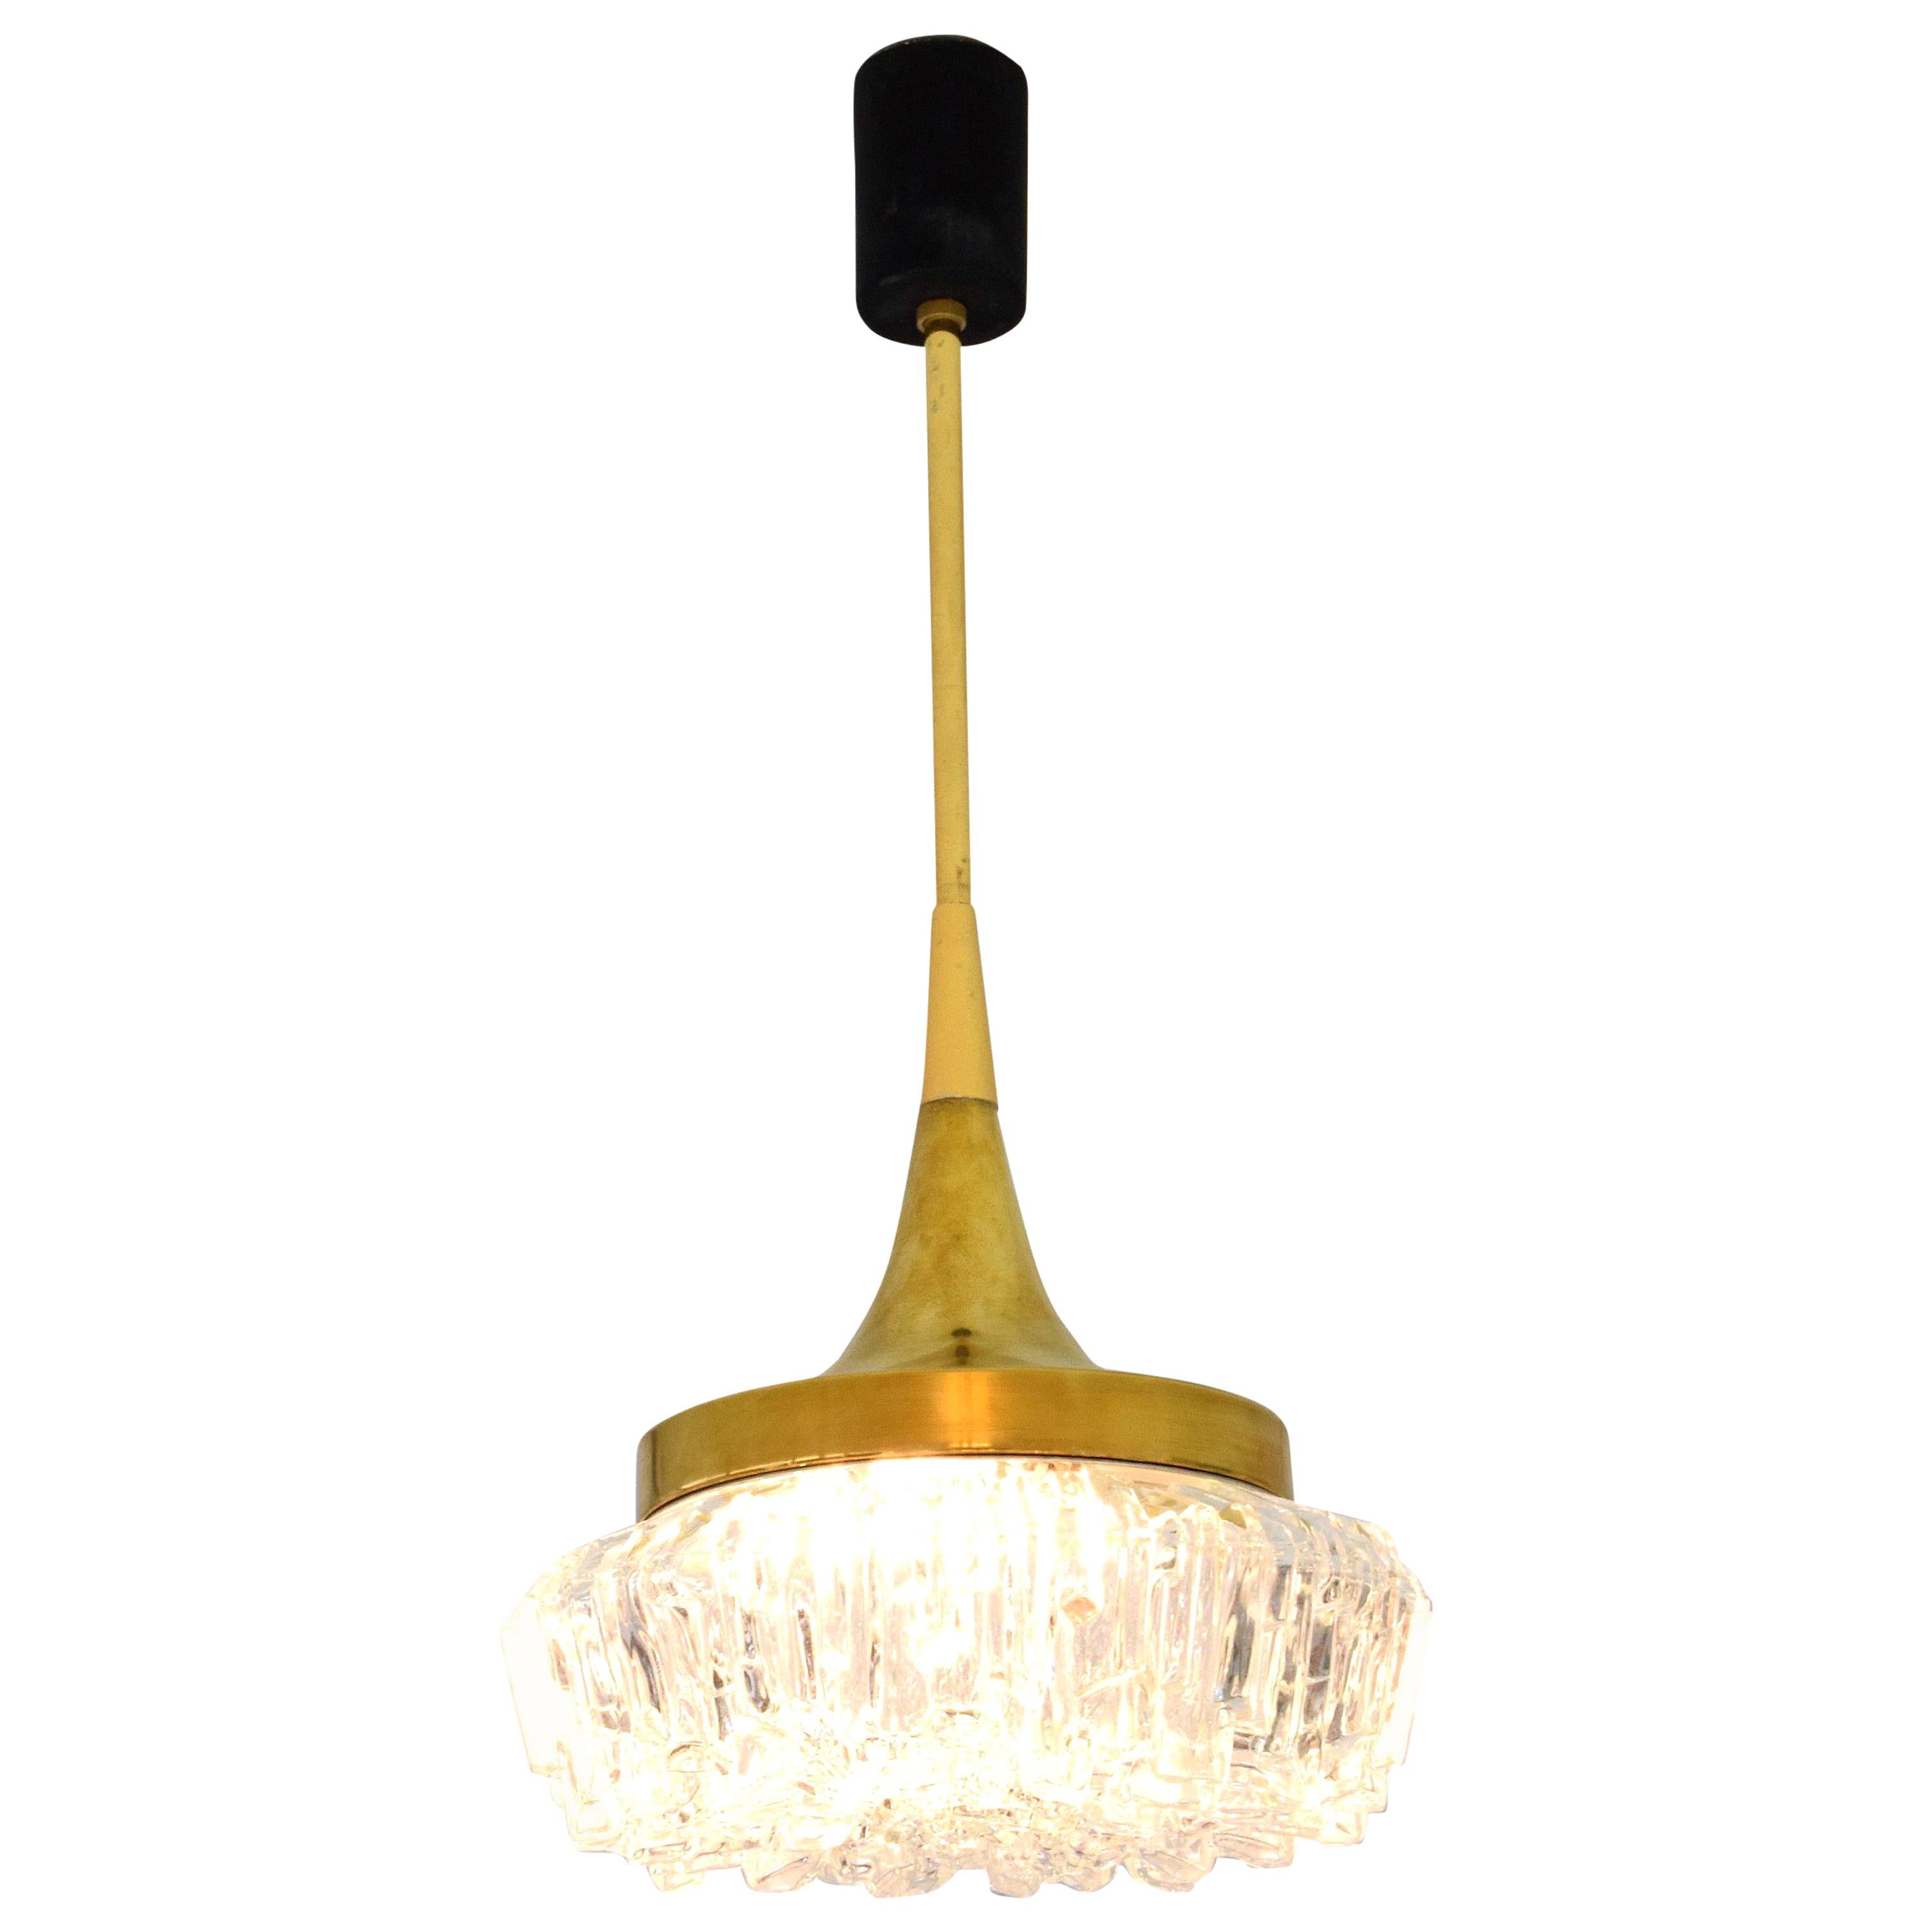 20th century French vintage pendant light composed of a slender polished gold brass structure and a single textured cut-clear glass shade in beautiful condition. 
Of Hollywood Regency style. Attributed to DLG Arlus. 
France, 1950s. 
The brass may